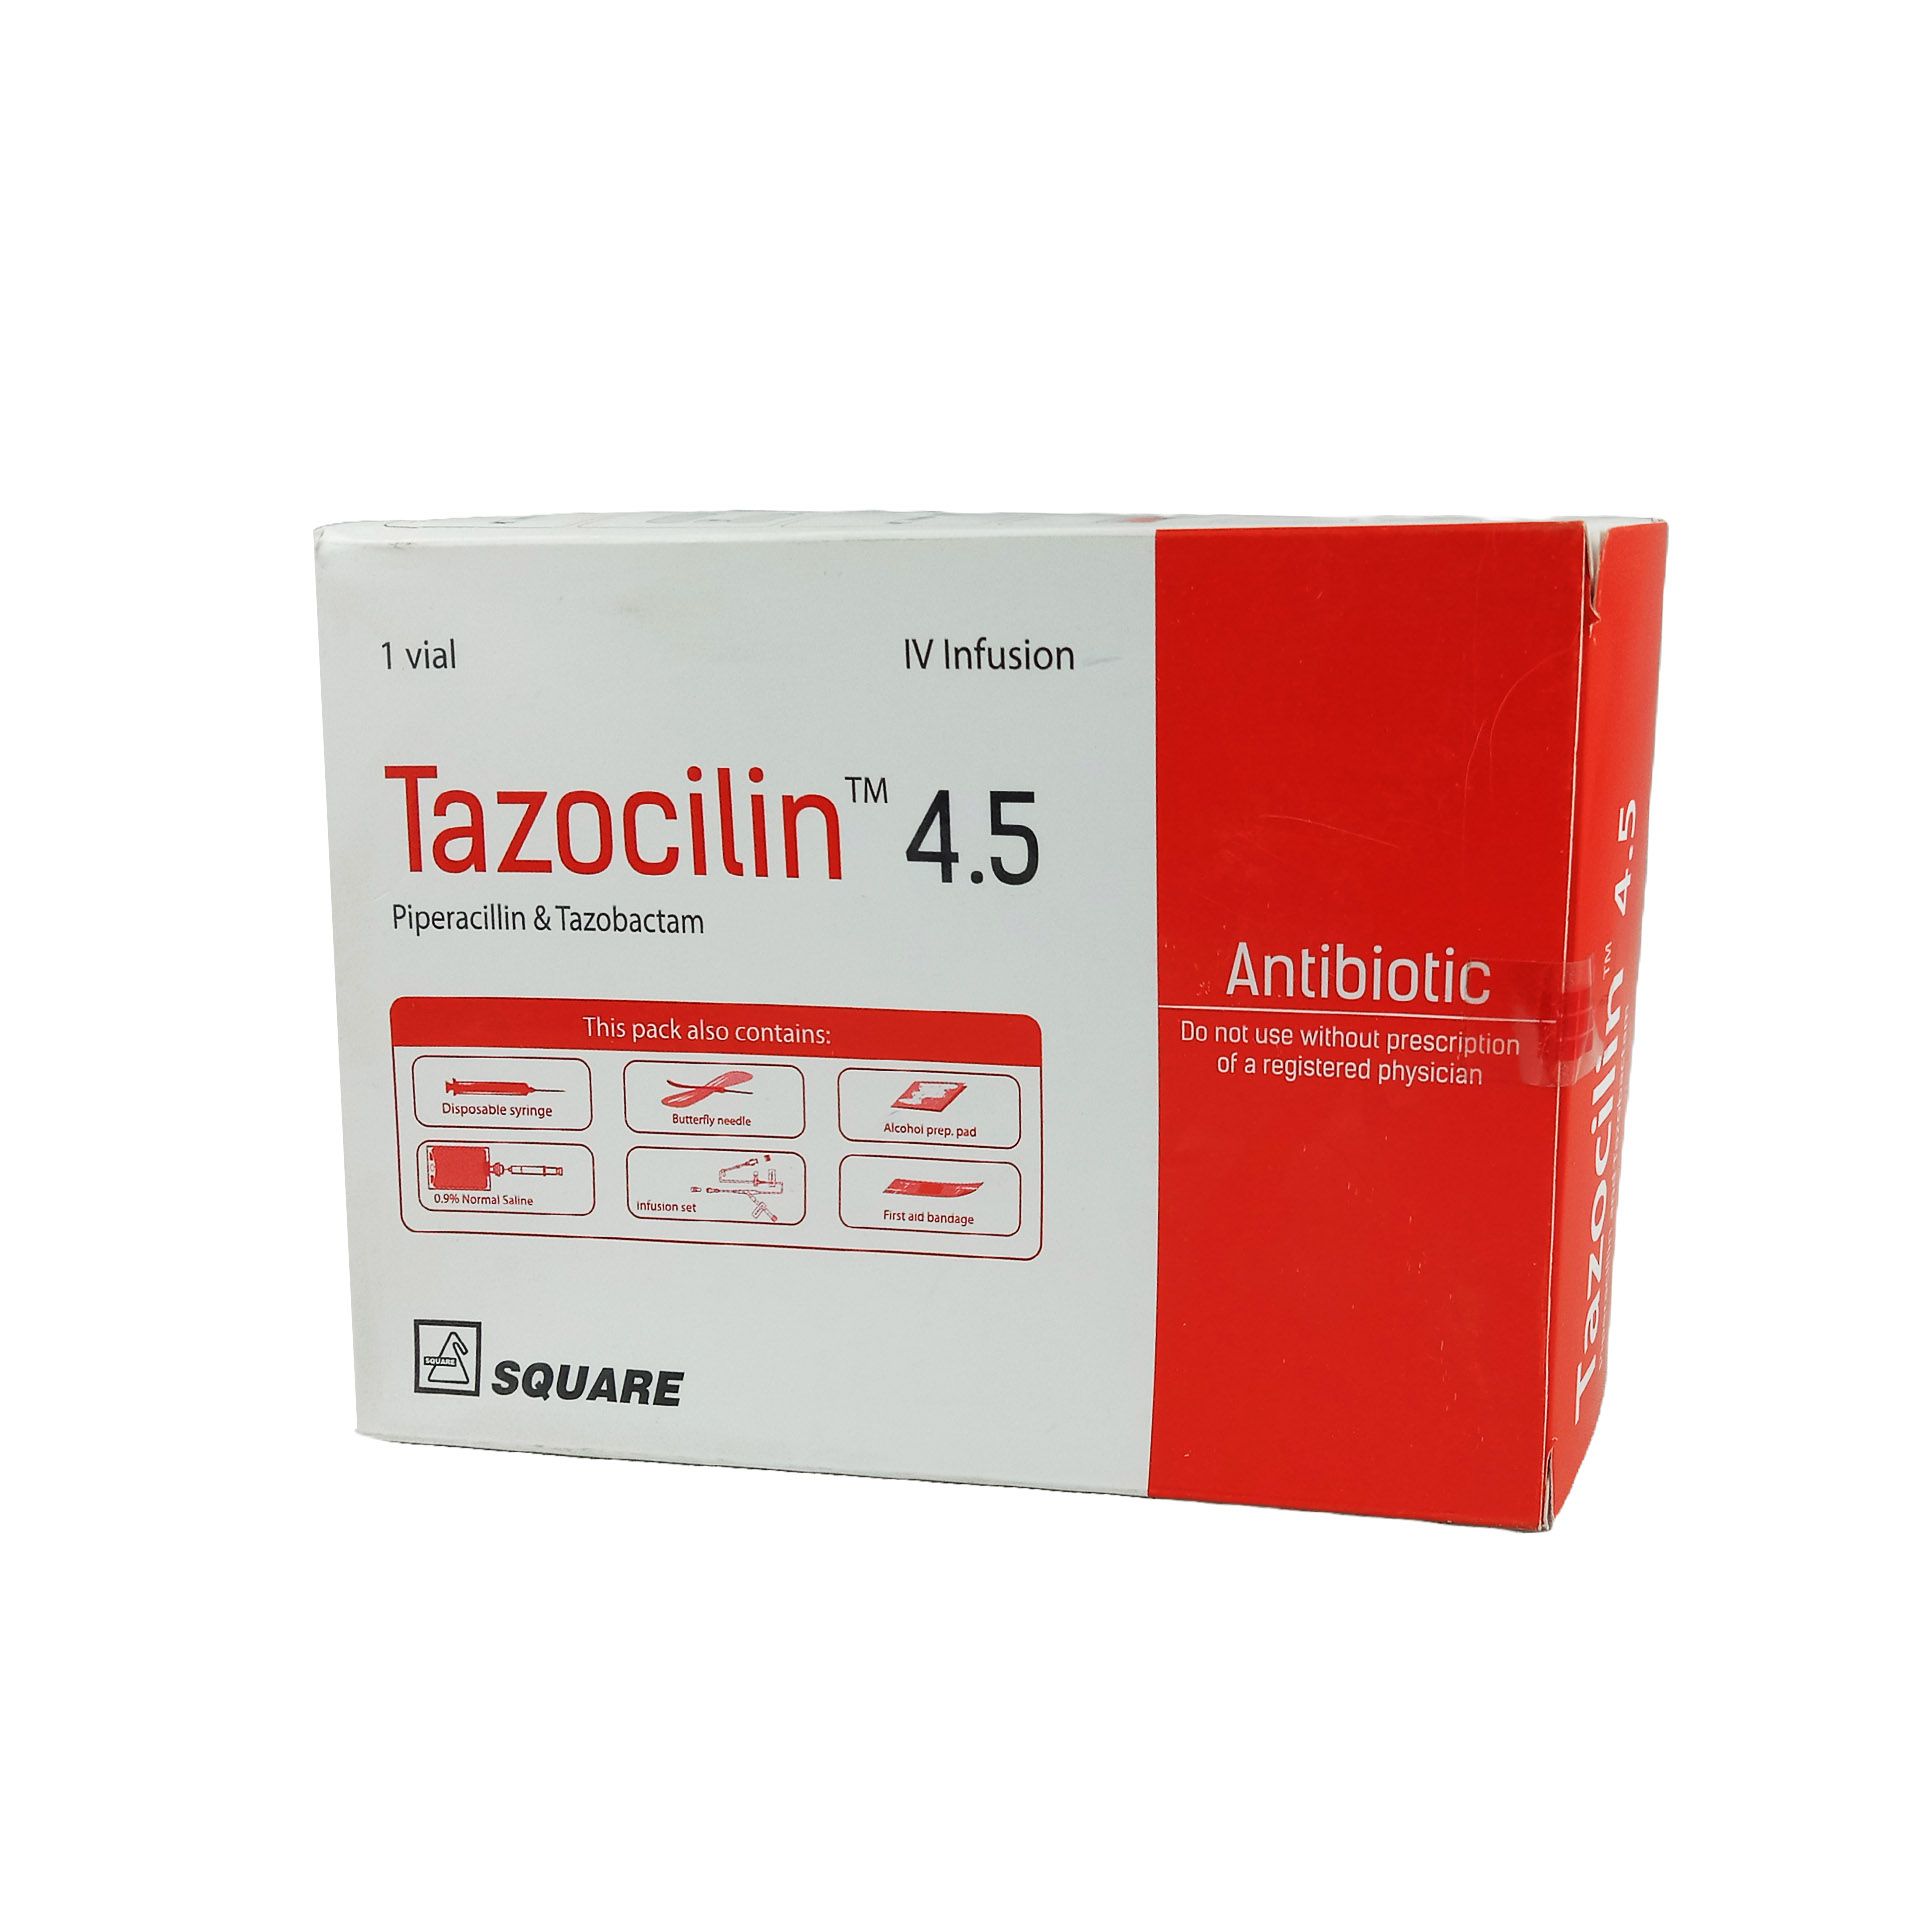 Tazocilin 4.5 IV 4gm+0.5gm/vial Injection